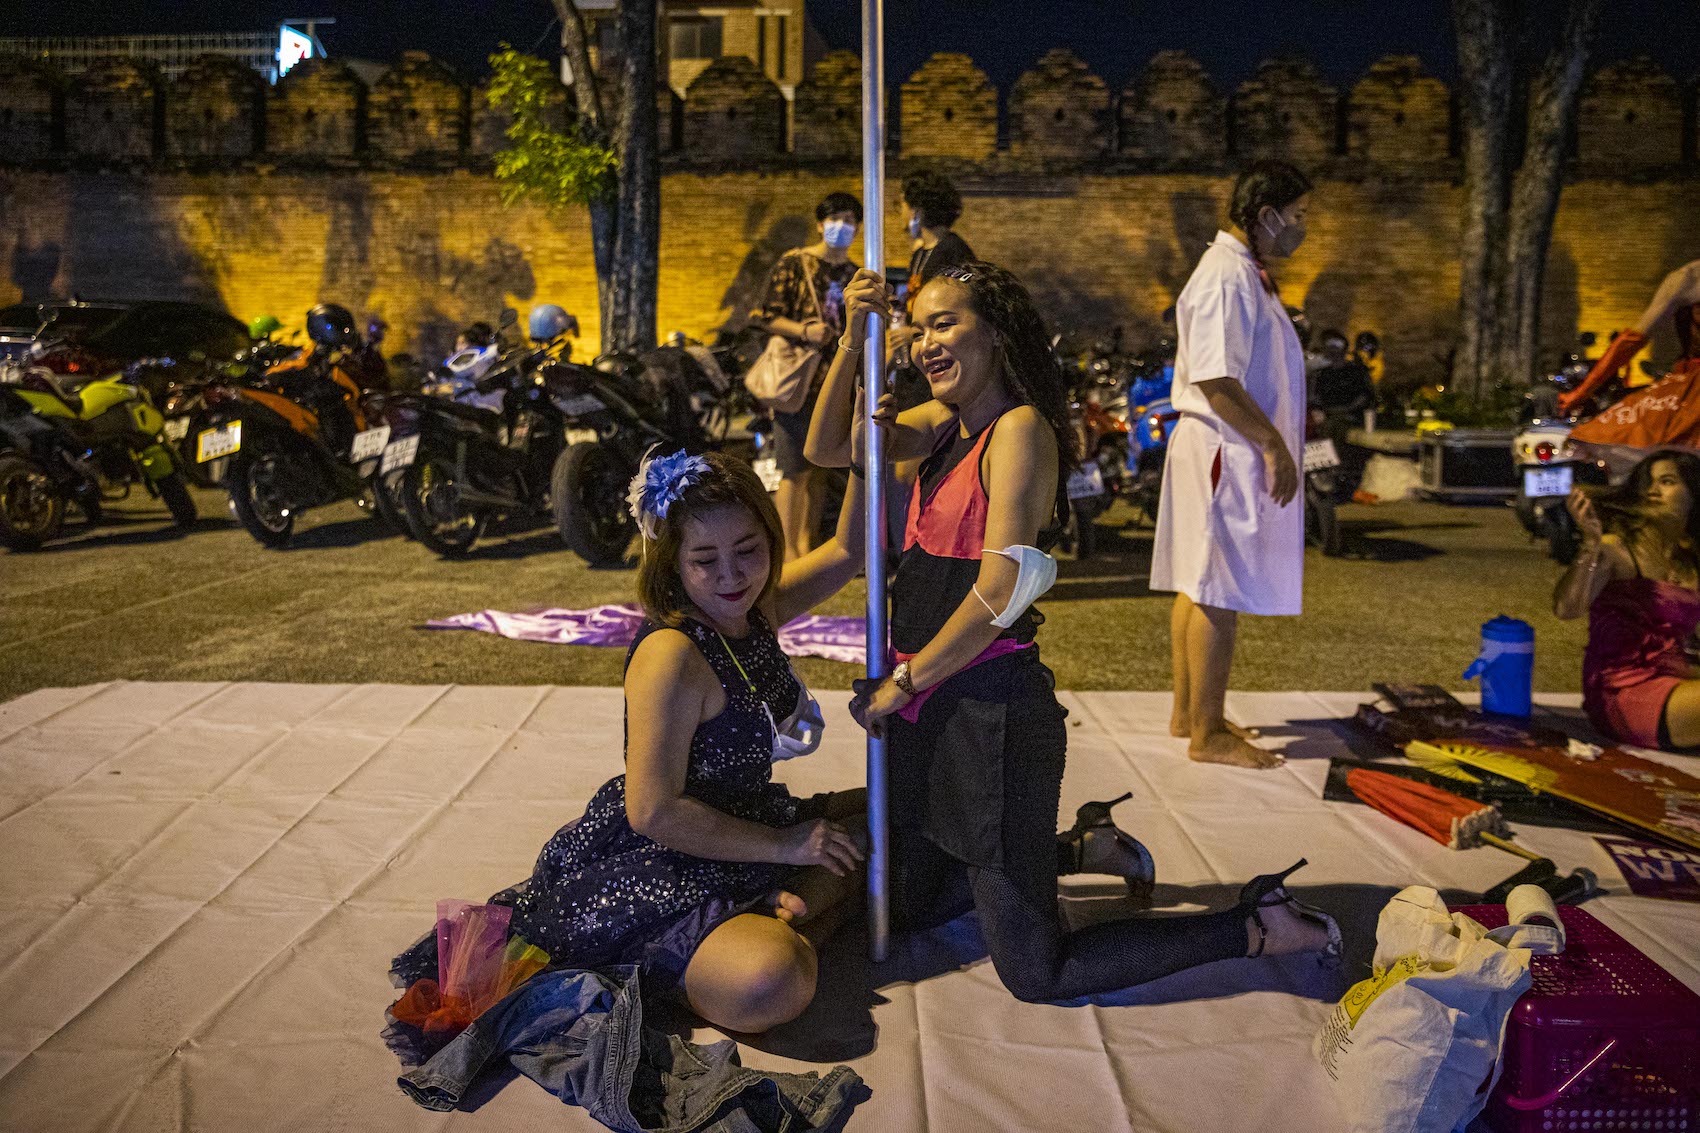 Thai sex workers with the Empower Foundation prepare for their performance backstage on May 01, 2022 in Chiang Mai, Thailand. 